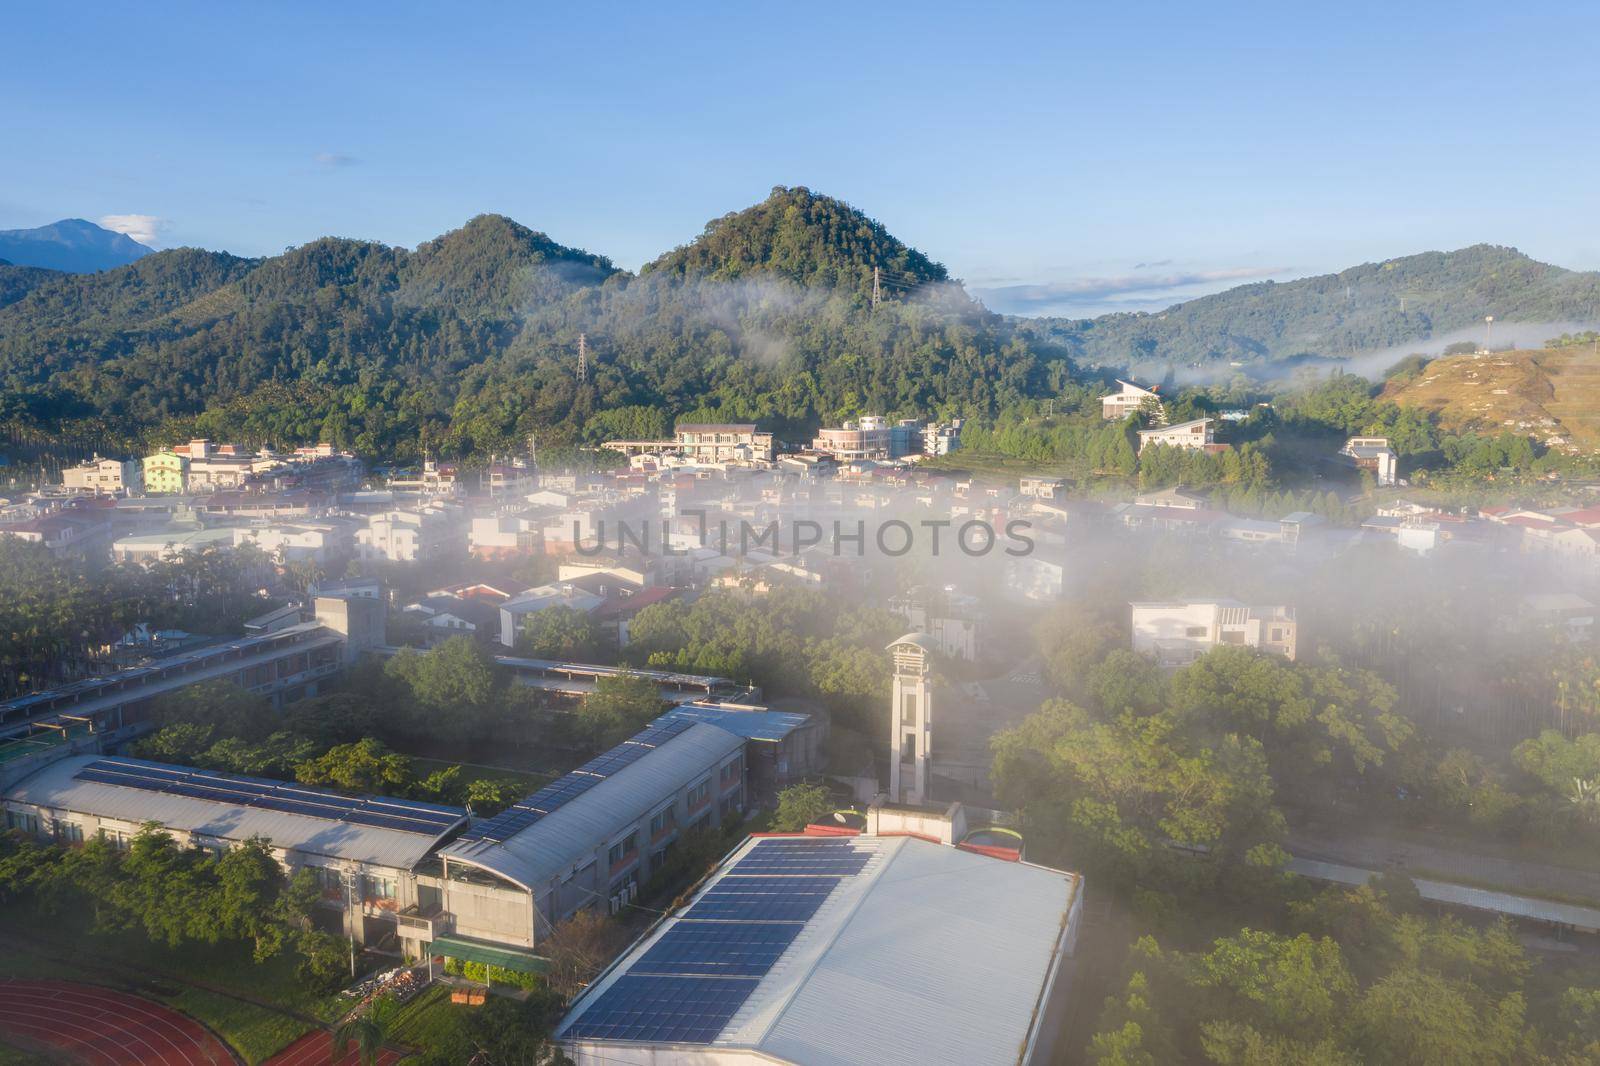 morning cloudy landscape with buildings under clouds and mist in Yuchi township, Nantou, Taiwan